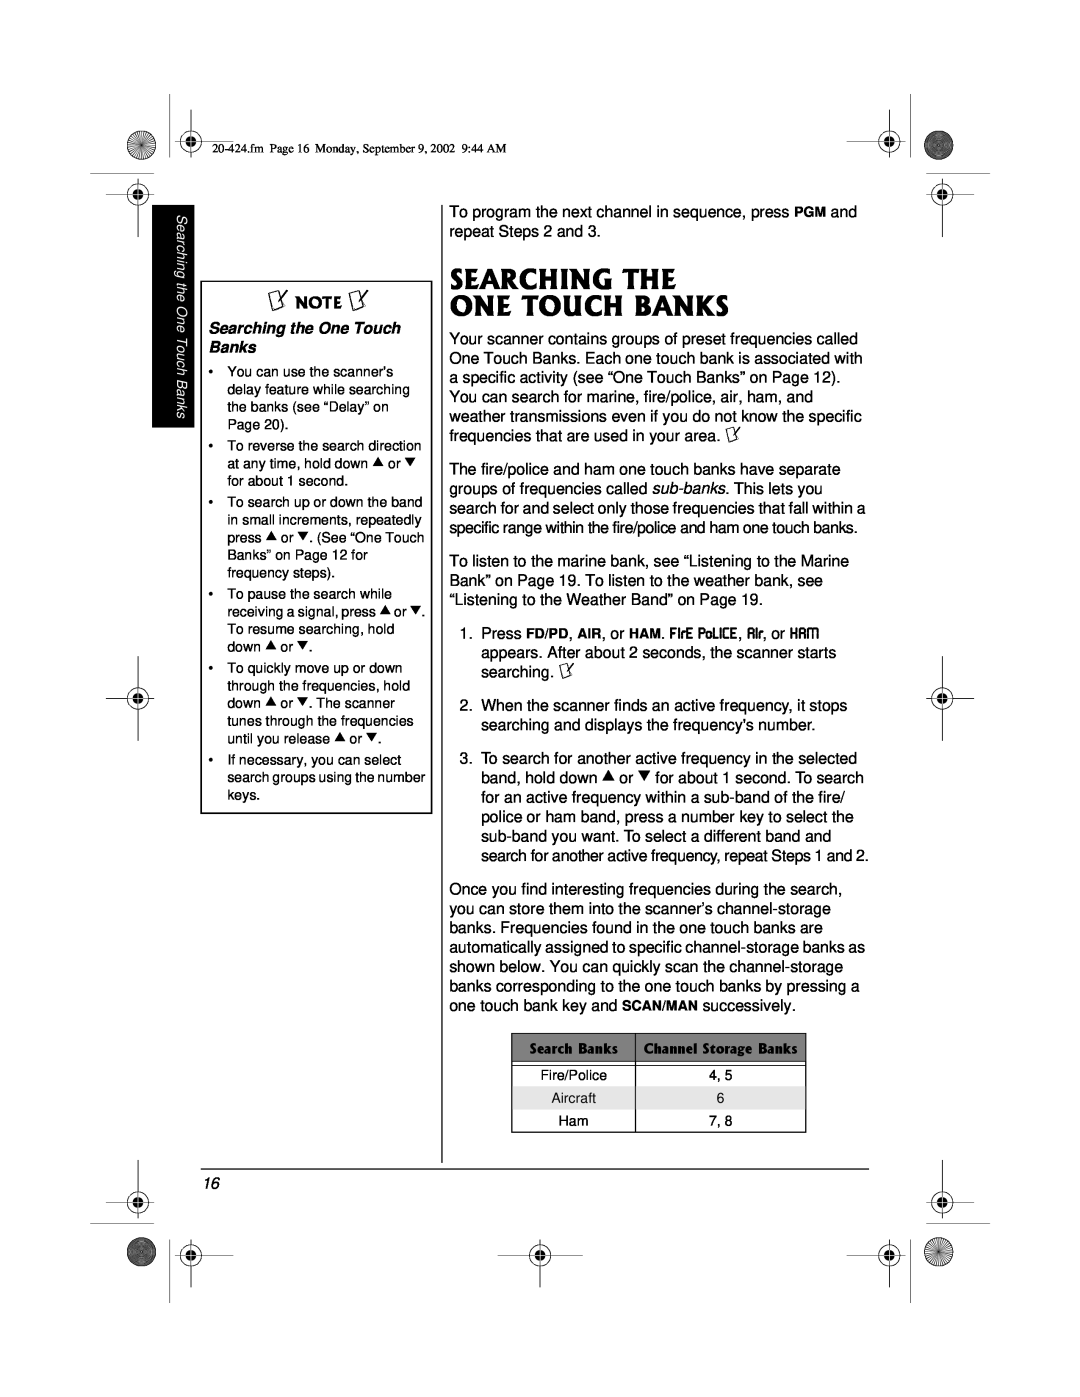 Radio Shack PRO-2018 manual 5#4%*+06* 10617%*$#0-5, Searching the One Touch Banks 